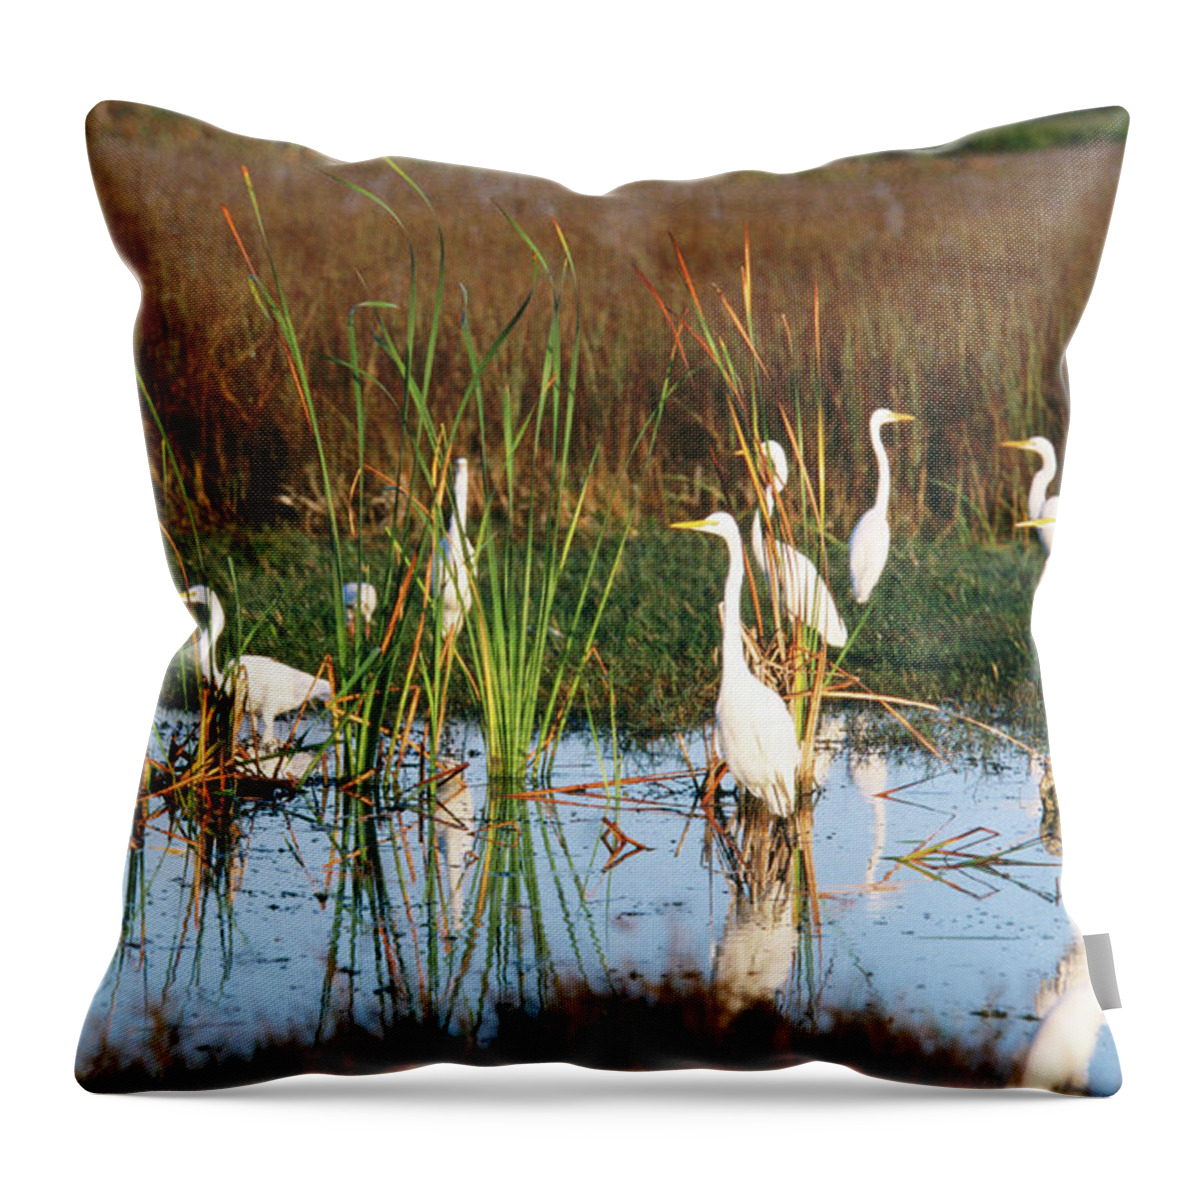 Outdoors Throw Pillow featuring the photograph Great Egrets Casmerodius Albus by Mark Newman